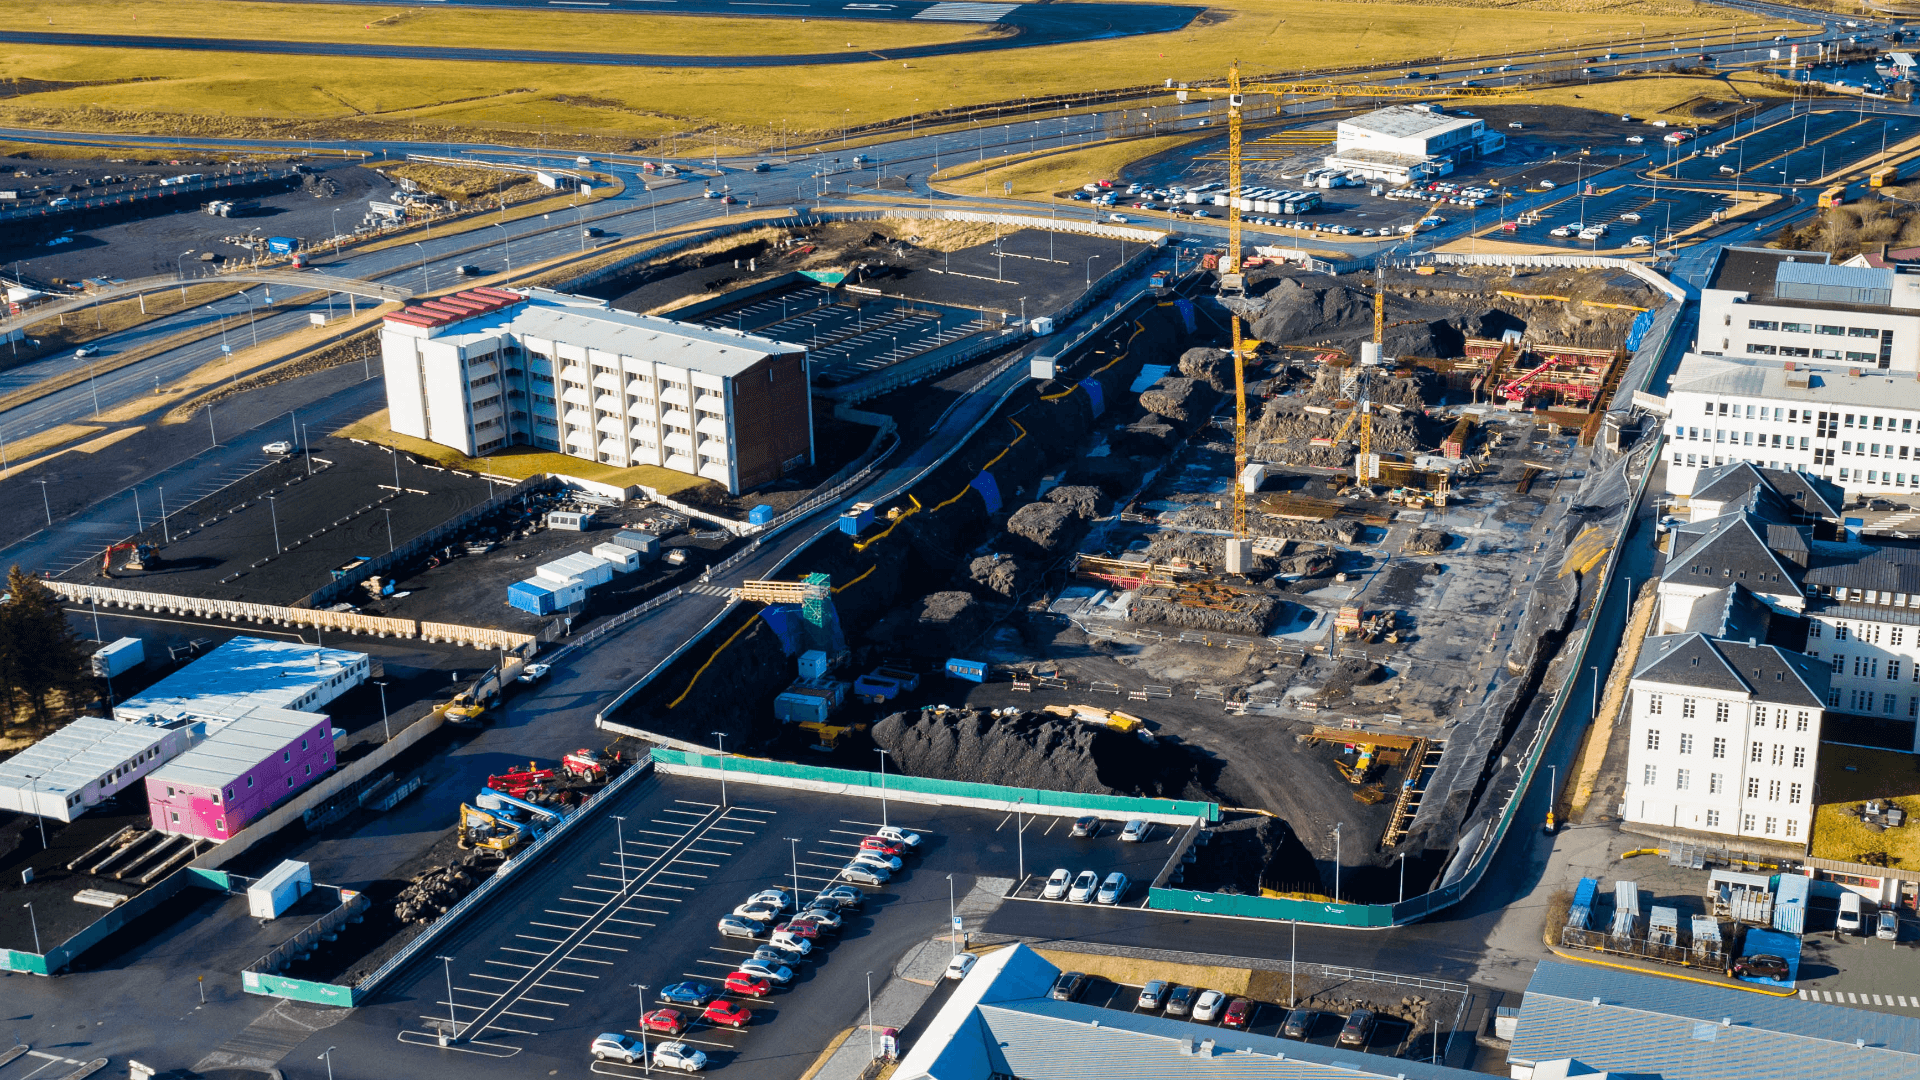 Aerial shot of a construction site and the buildings next to it